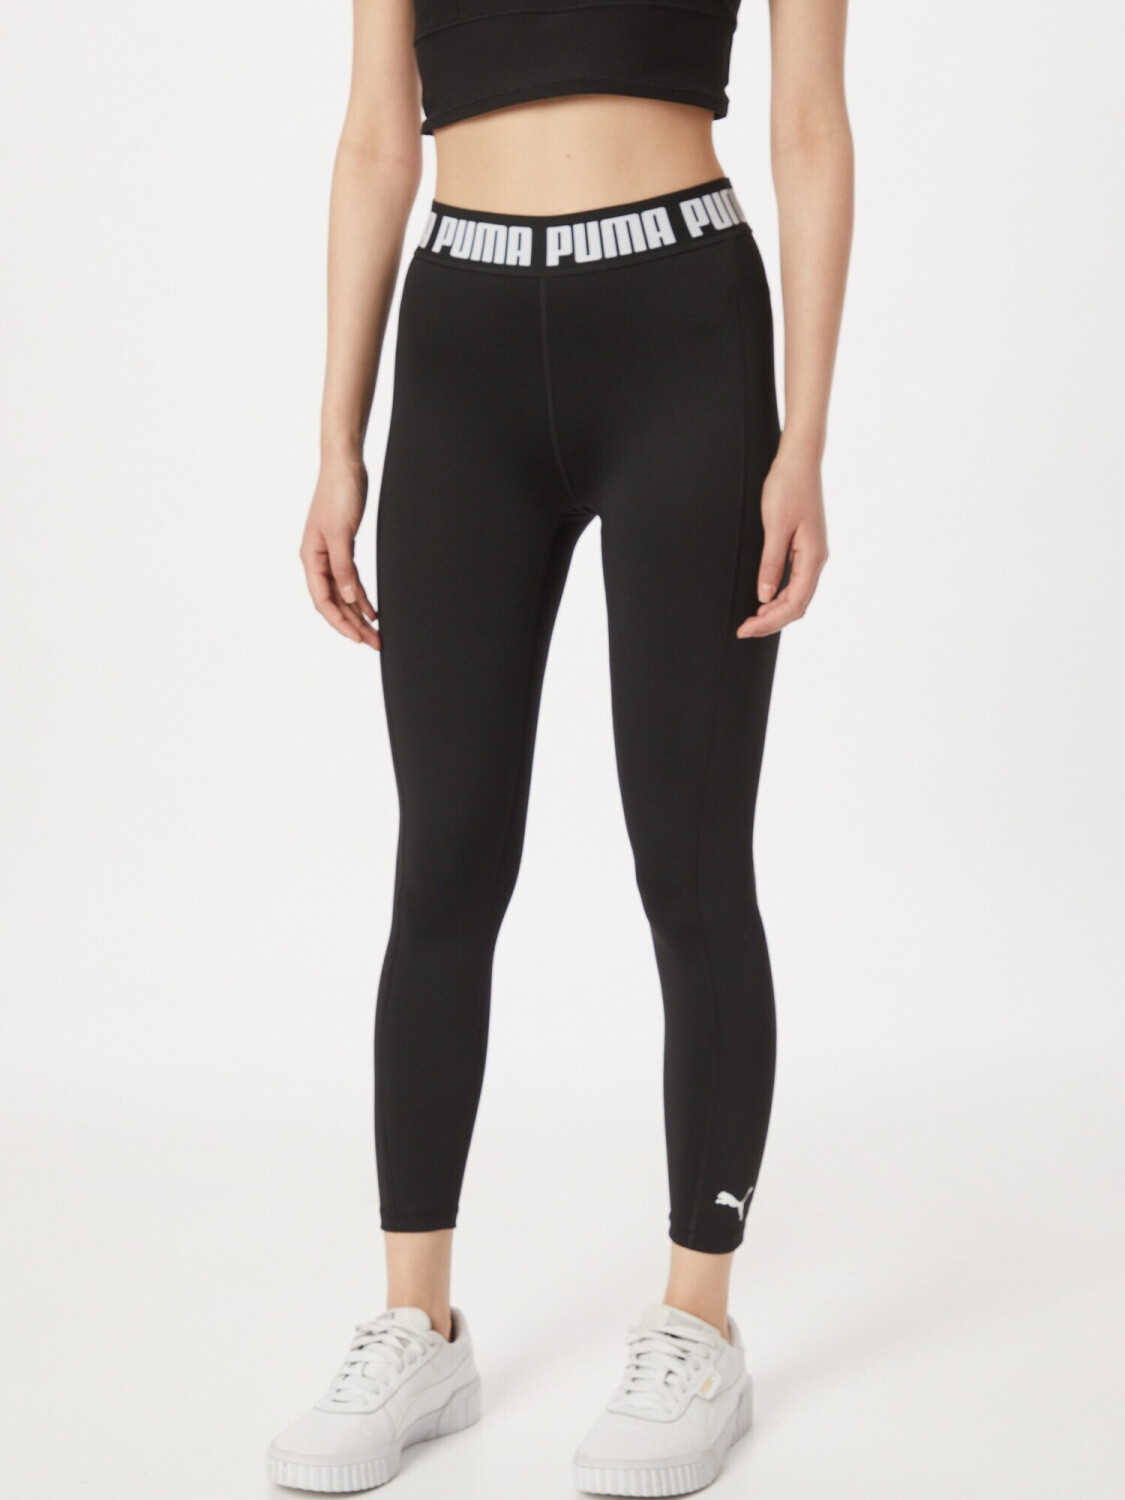 from Leggings Buy (521601) – Deals black (Today) on Full Strong Waist Puma £12.00 puma Best High